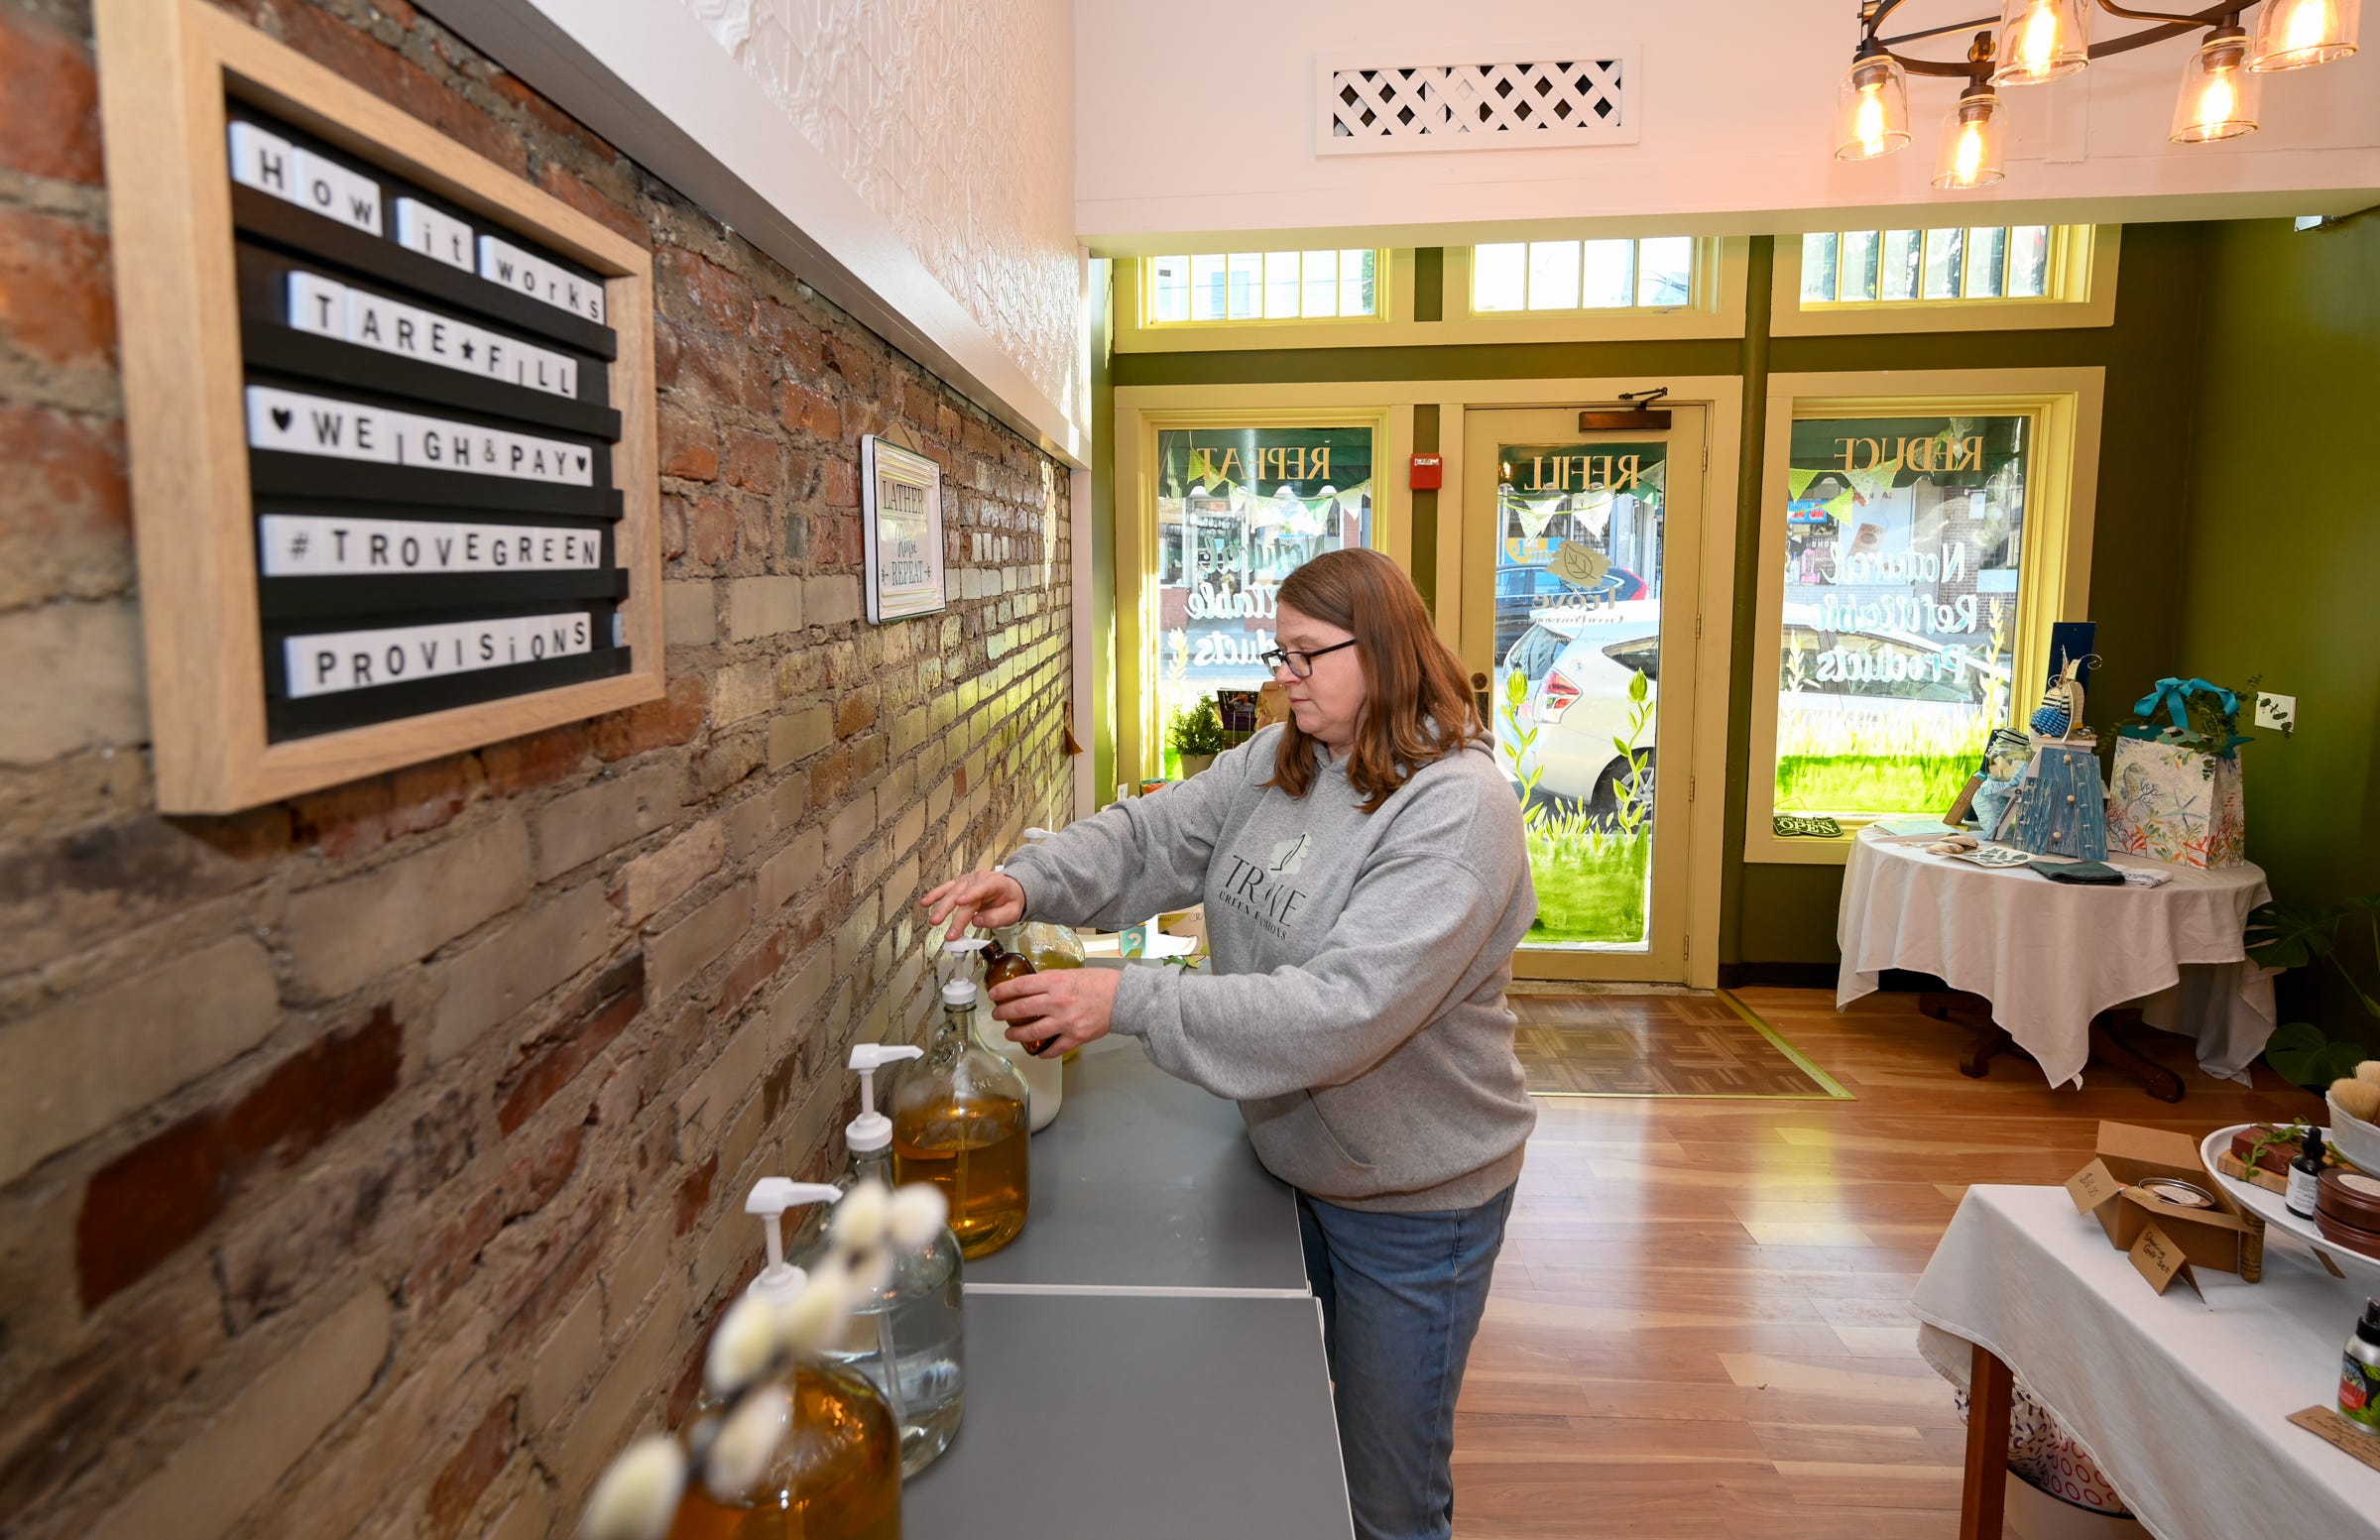 Clare Flaherty fills up a glass bottle of liquid soap at the refilling station at Trove Green Provisions in Medford on Tuesday, June 21, 2022.